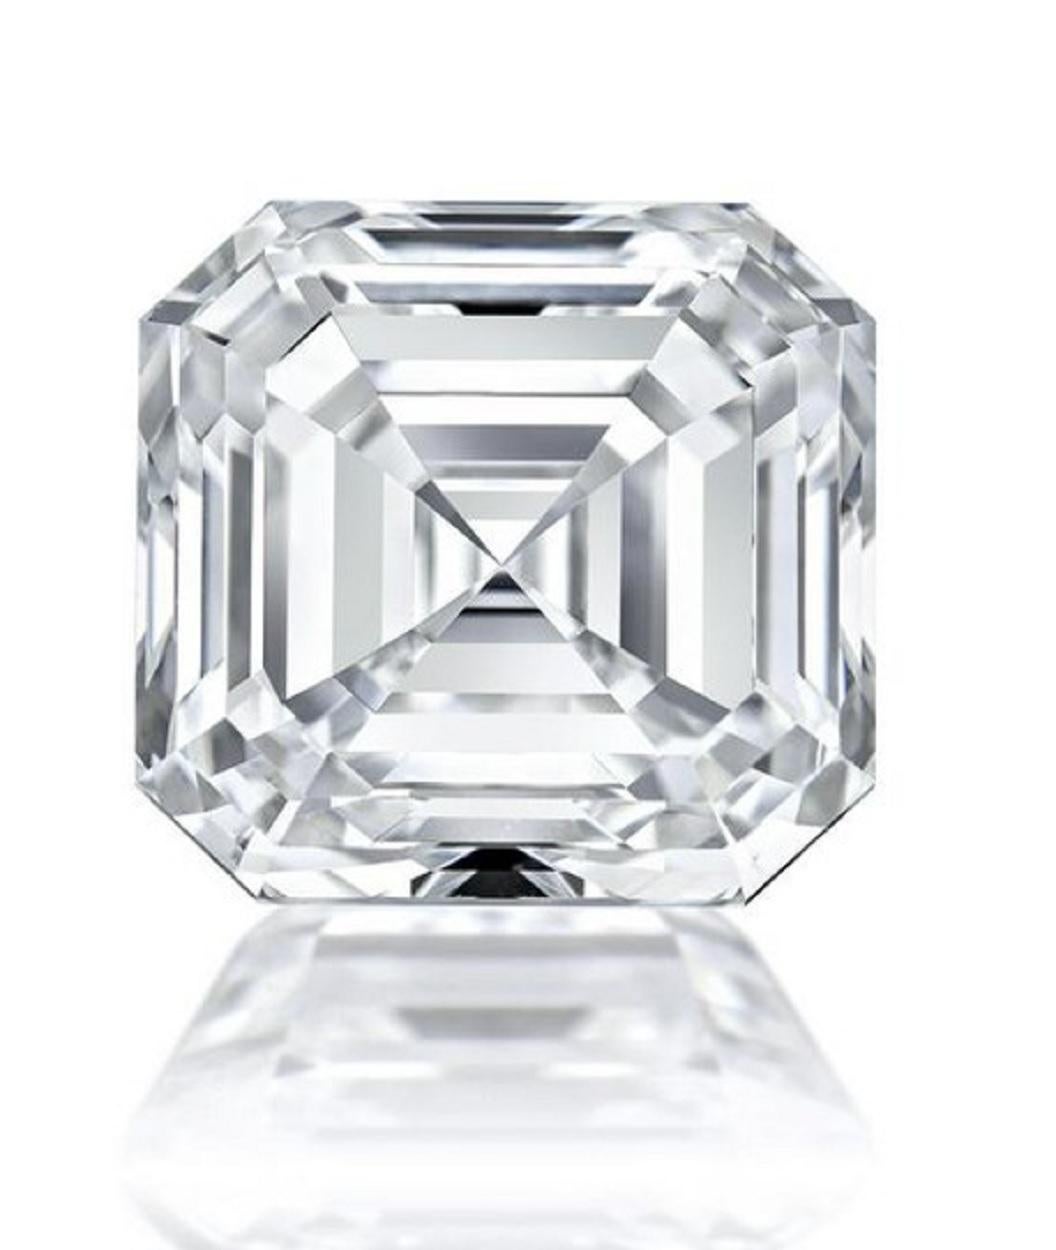 Amazing and huge very clear and white natural square emerald cut diamond certified by GIA.

Inquire us about videos or pictures is a real amazing diamond!